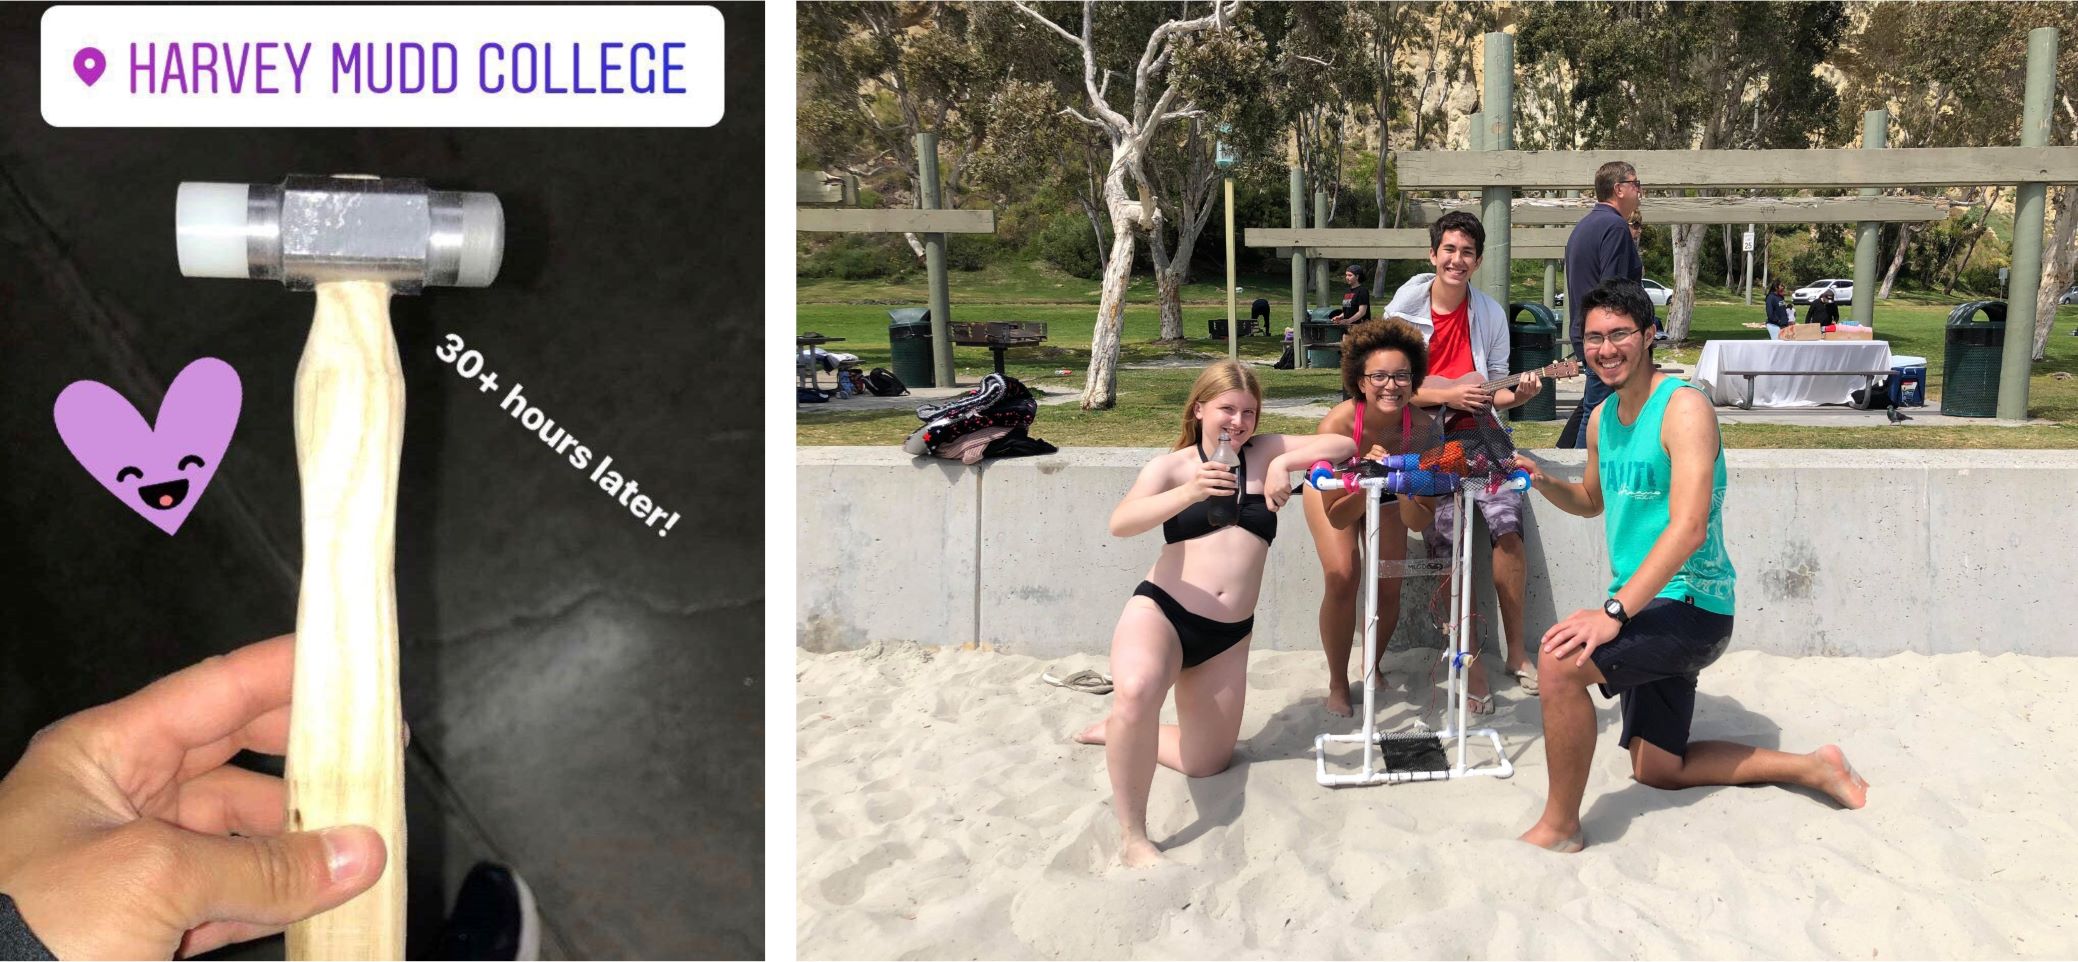 Left photo is of a hammer that Mary made. It has a Harvey Mudd College geotag and text that reads "30+ hours later!". The right photo is of her and three people posing with a robot at a beach.